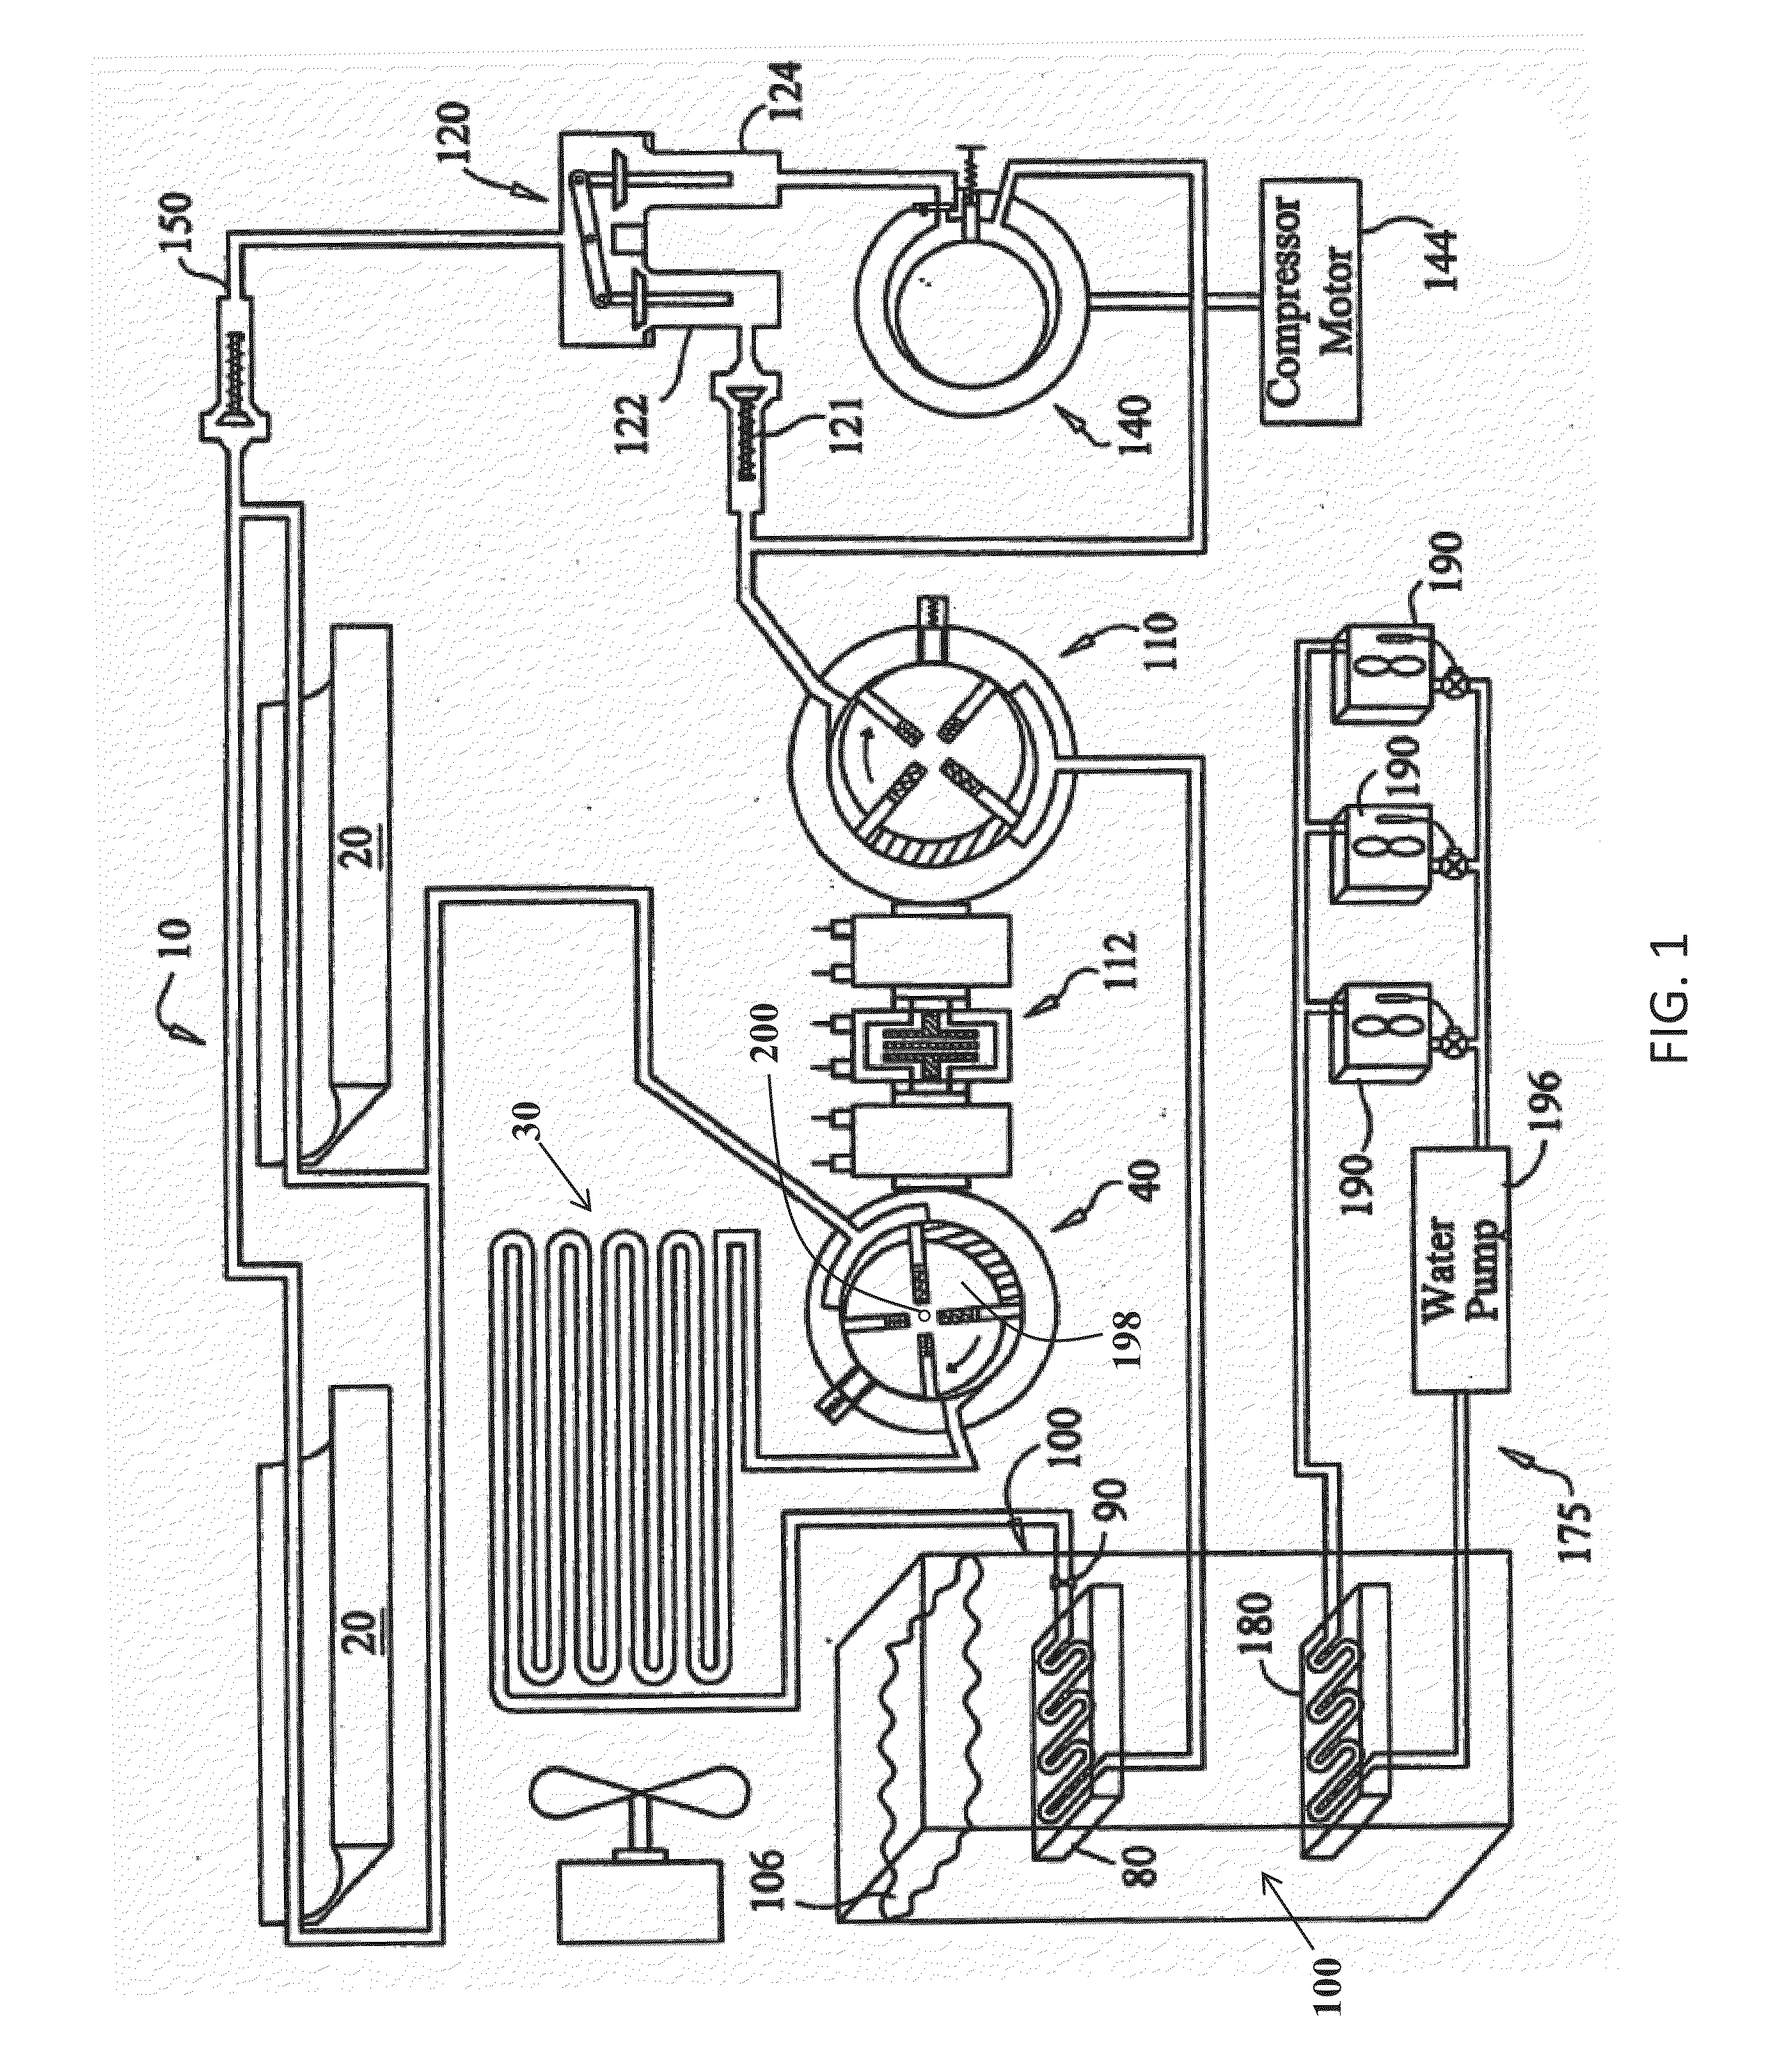 Solar energy air conditioning system with storage capability